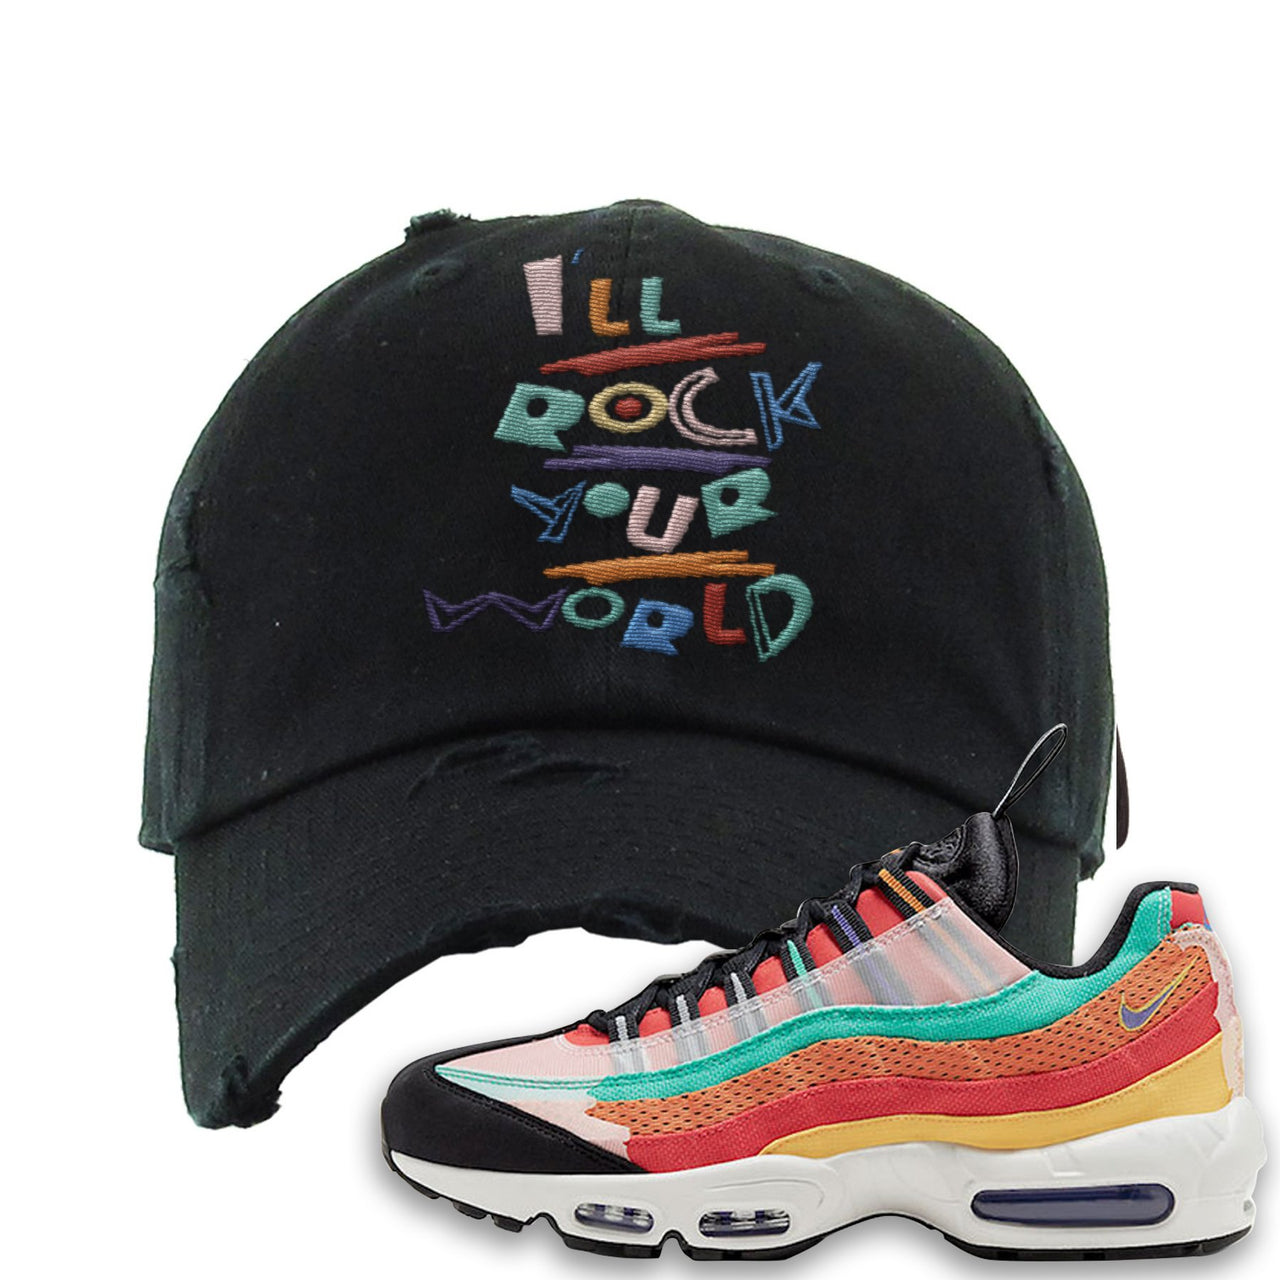 Air Max 95 Black History Month Sneaker Black Distressed Dad Hat | Hat to match Air Max 95 Black History Month Shoes | I'll Rock Your World